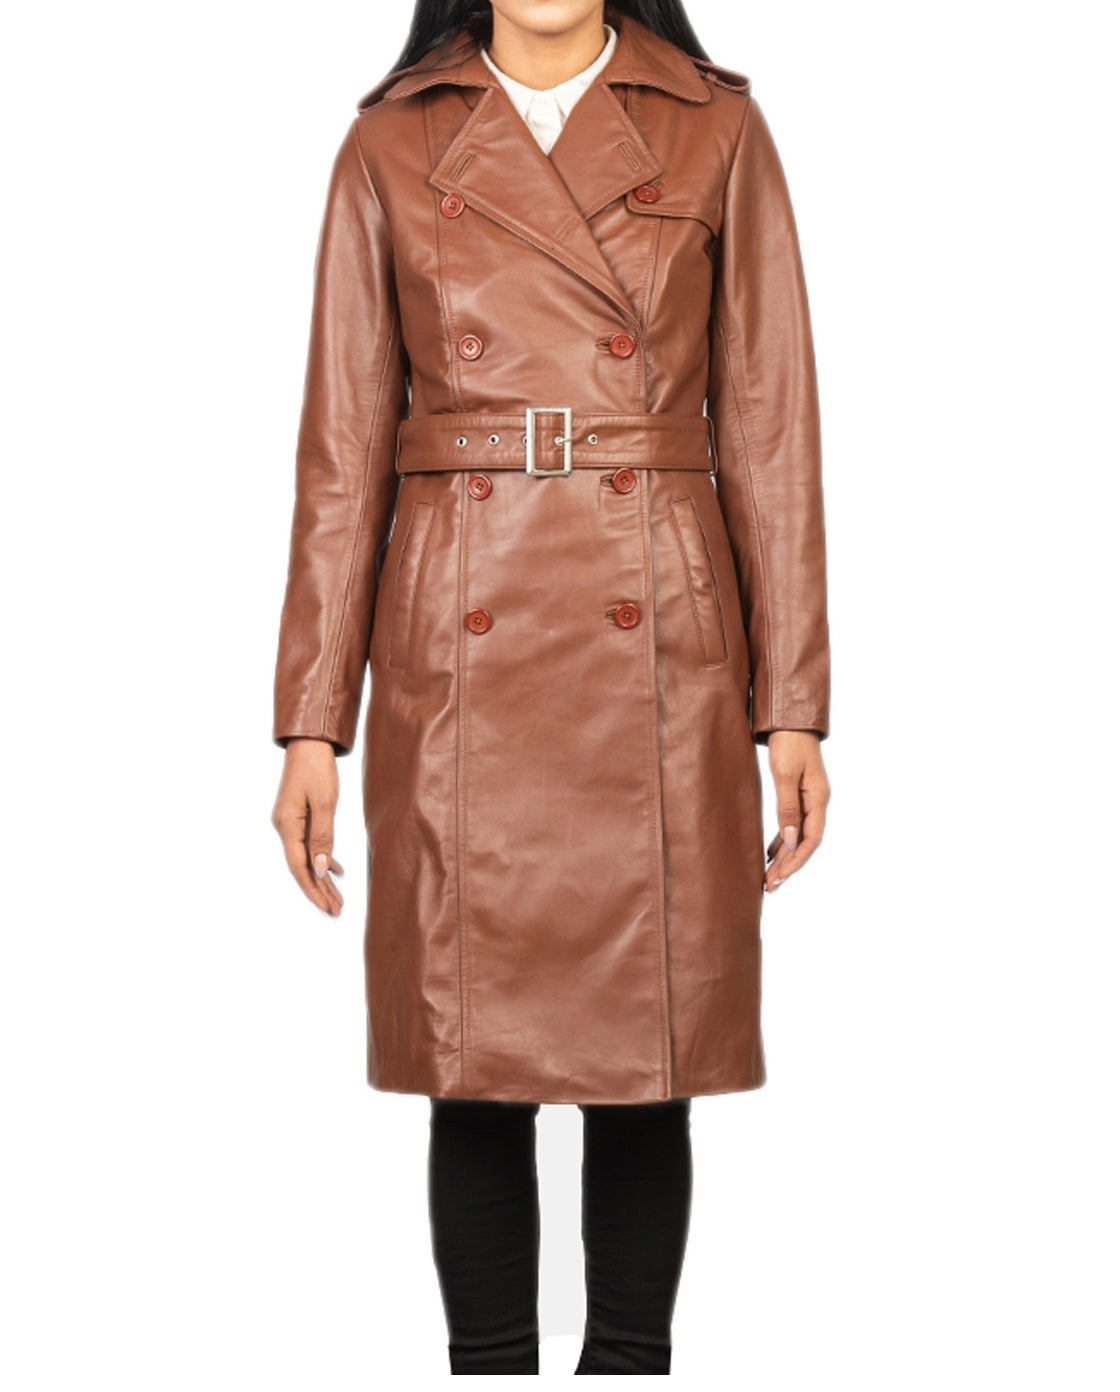 Tan Casual German Style Leather Trench Coat For Women